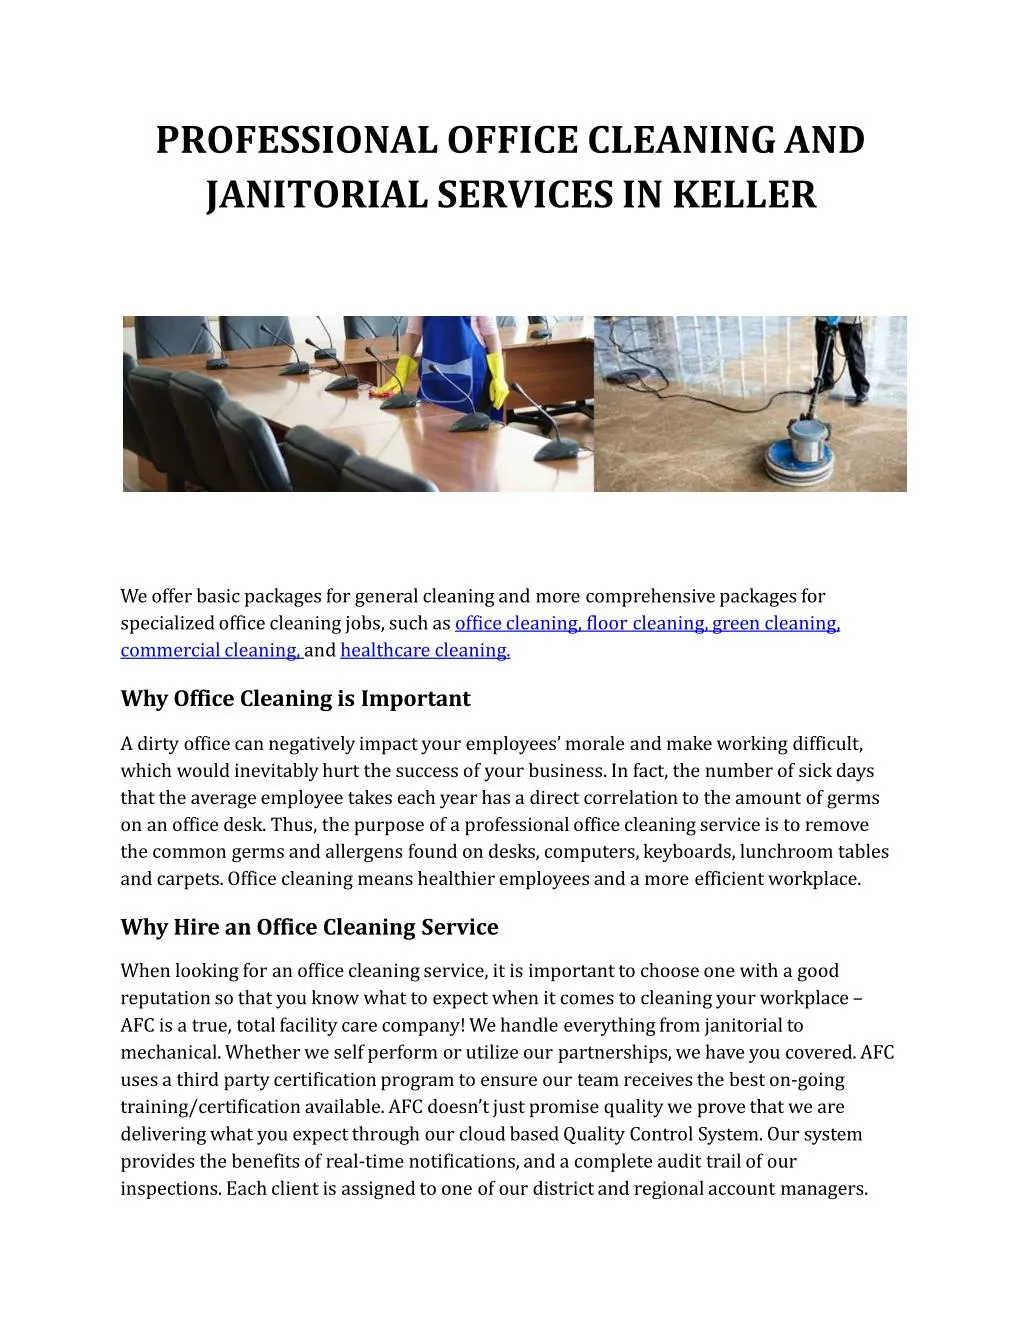 professional office cleaning and janitorial services in keller